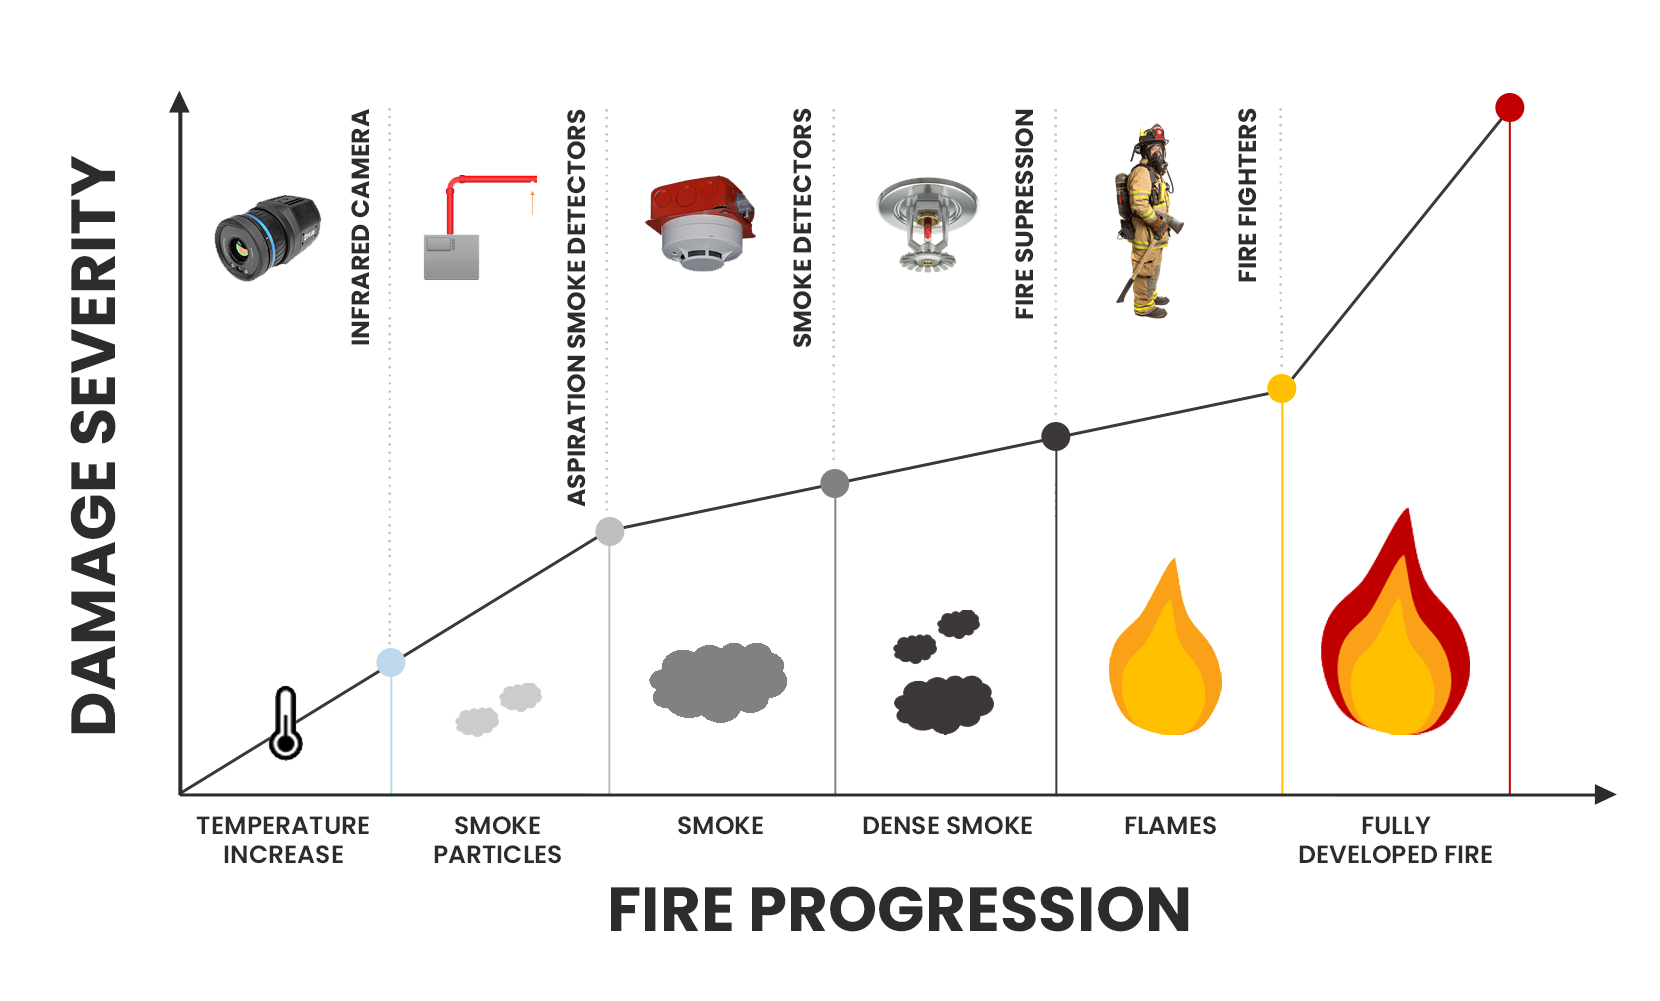 Graph of fire progression, showing infrared cameras are the first to detect fire.